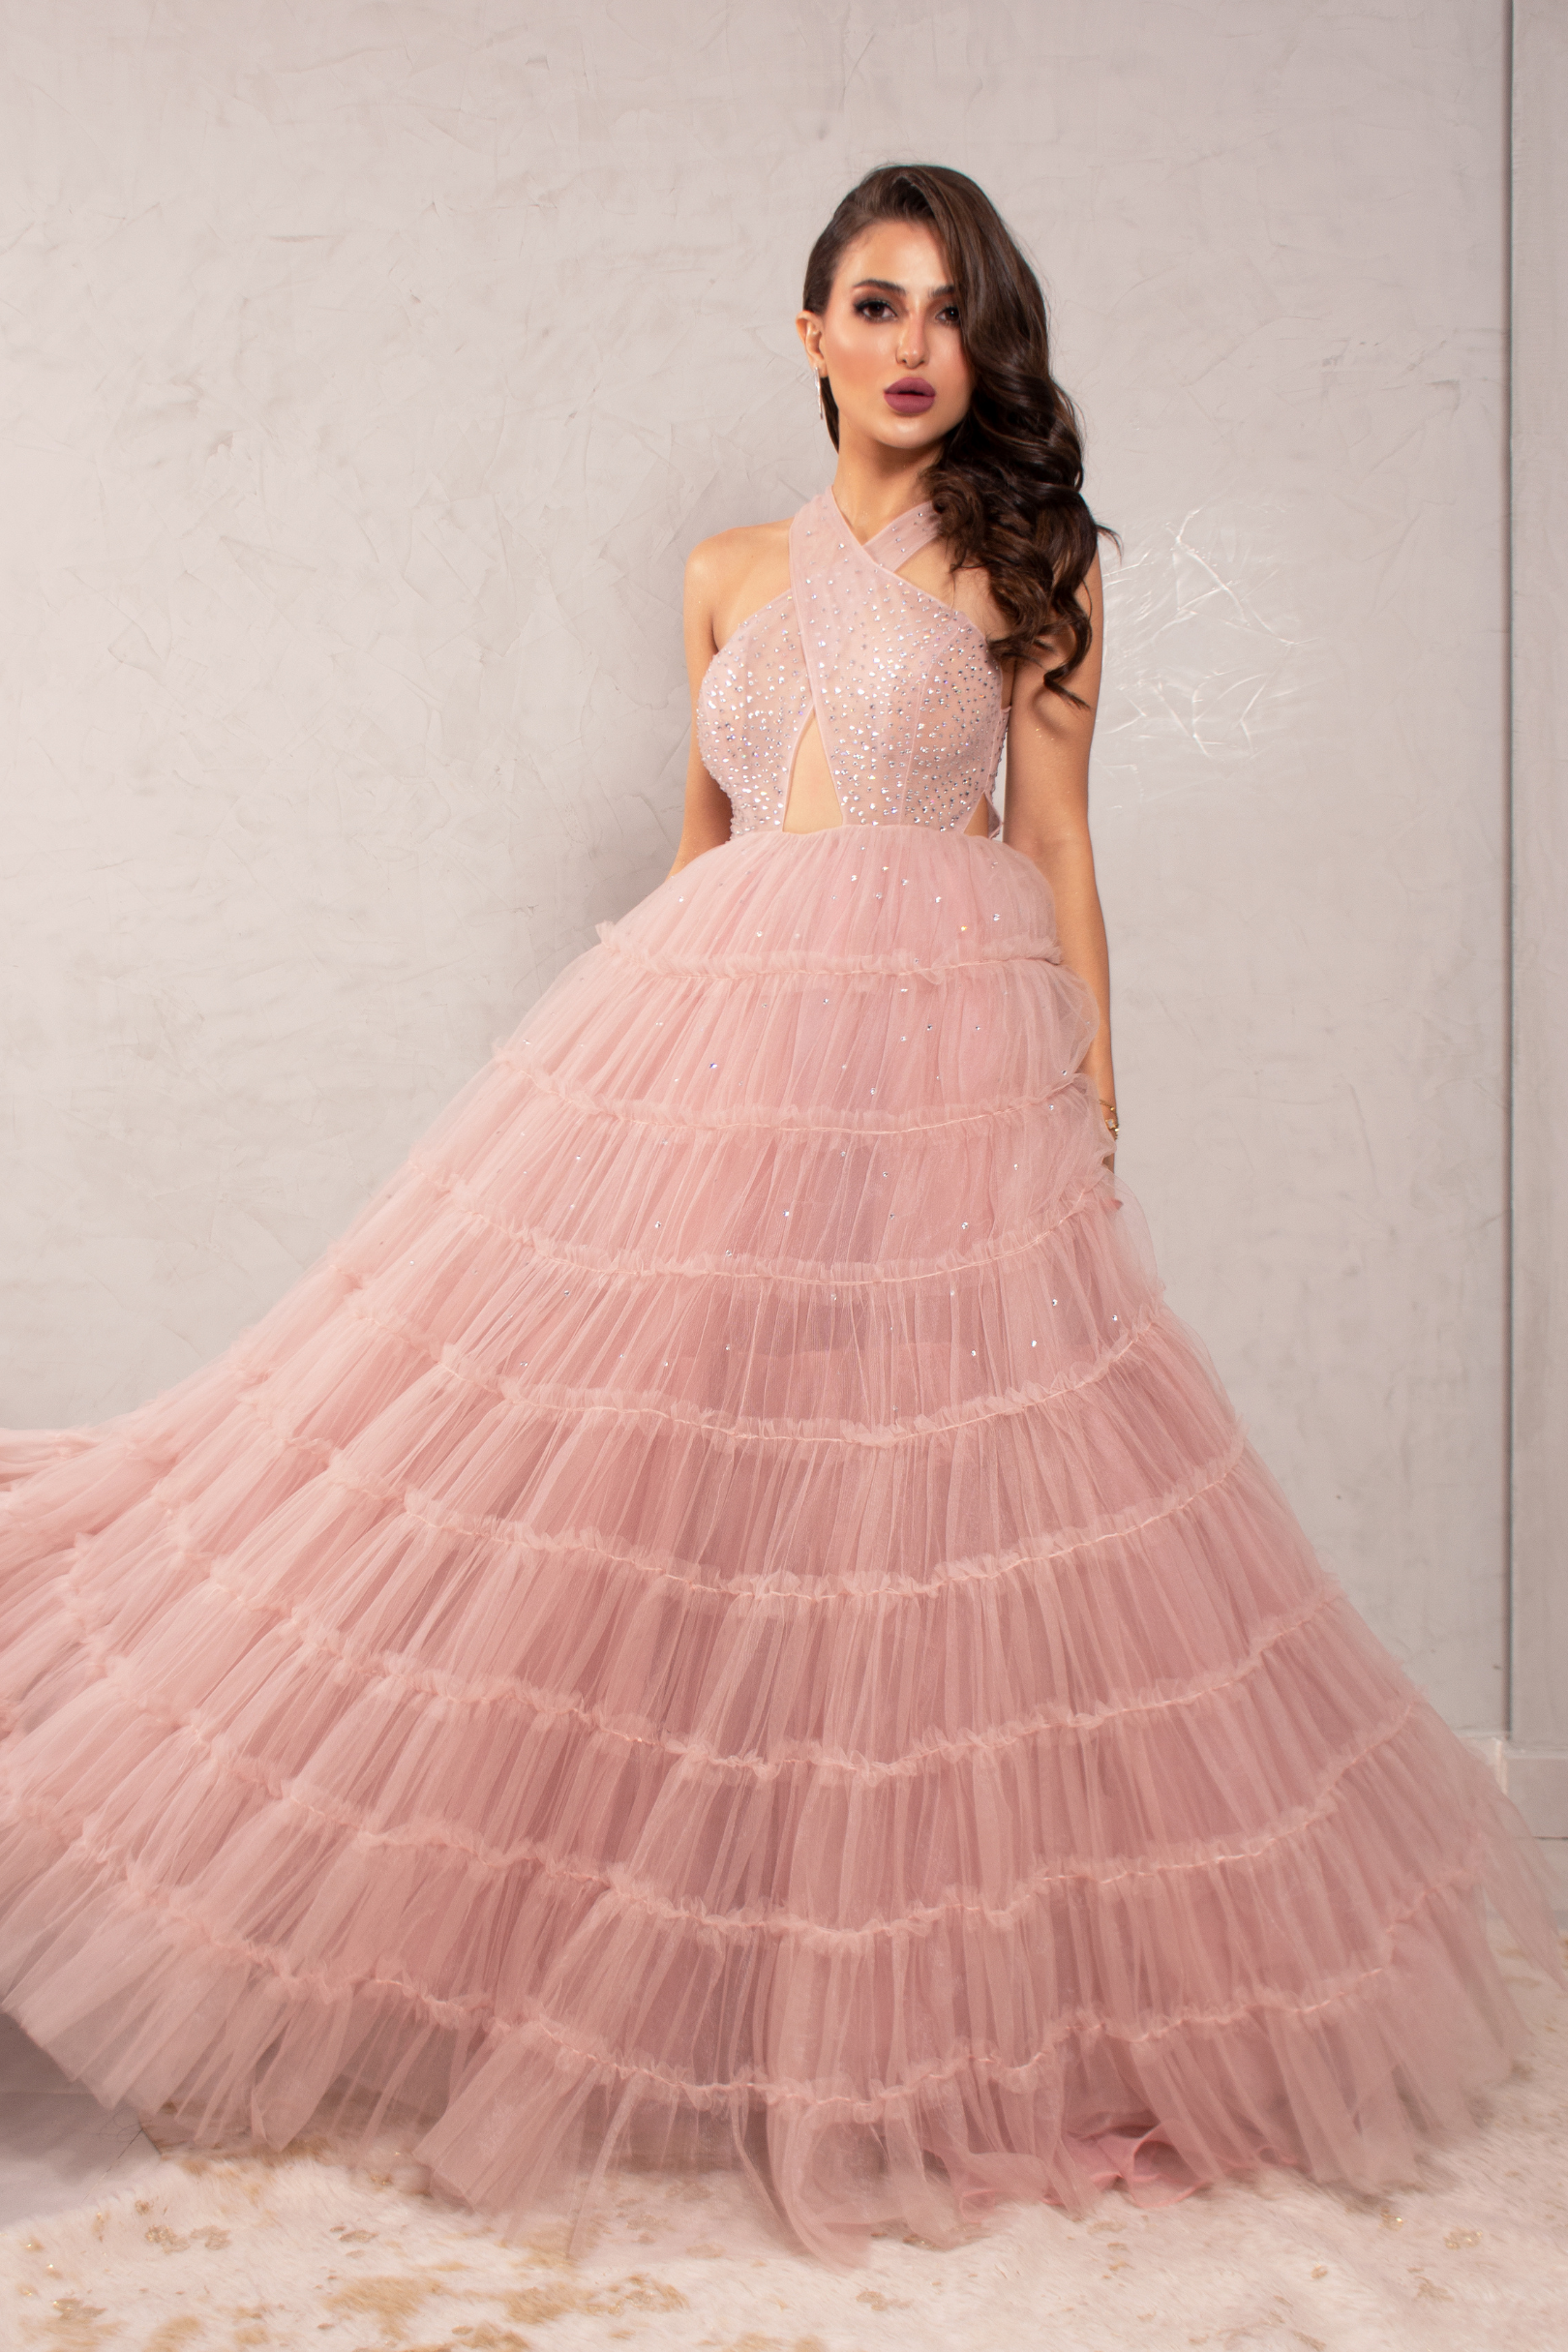 Pink dress with an X-shaped bodice decorated with shiny stones